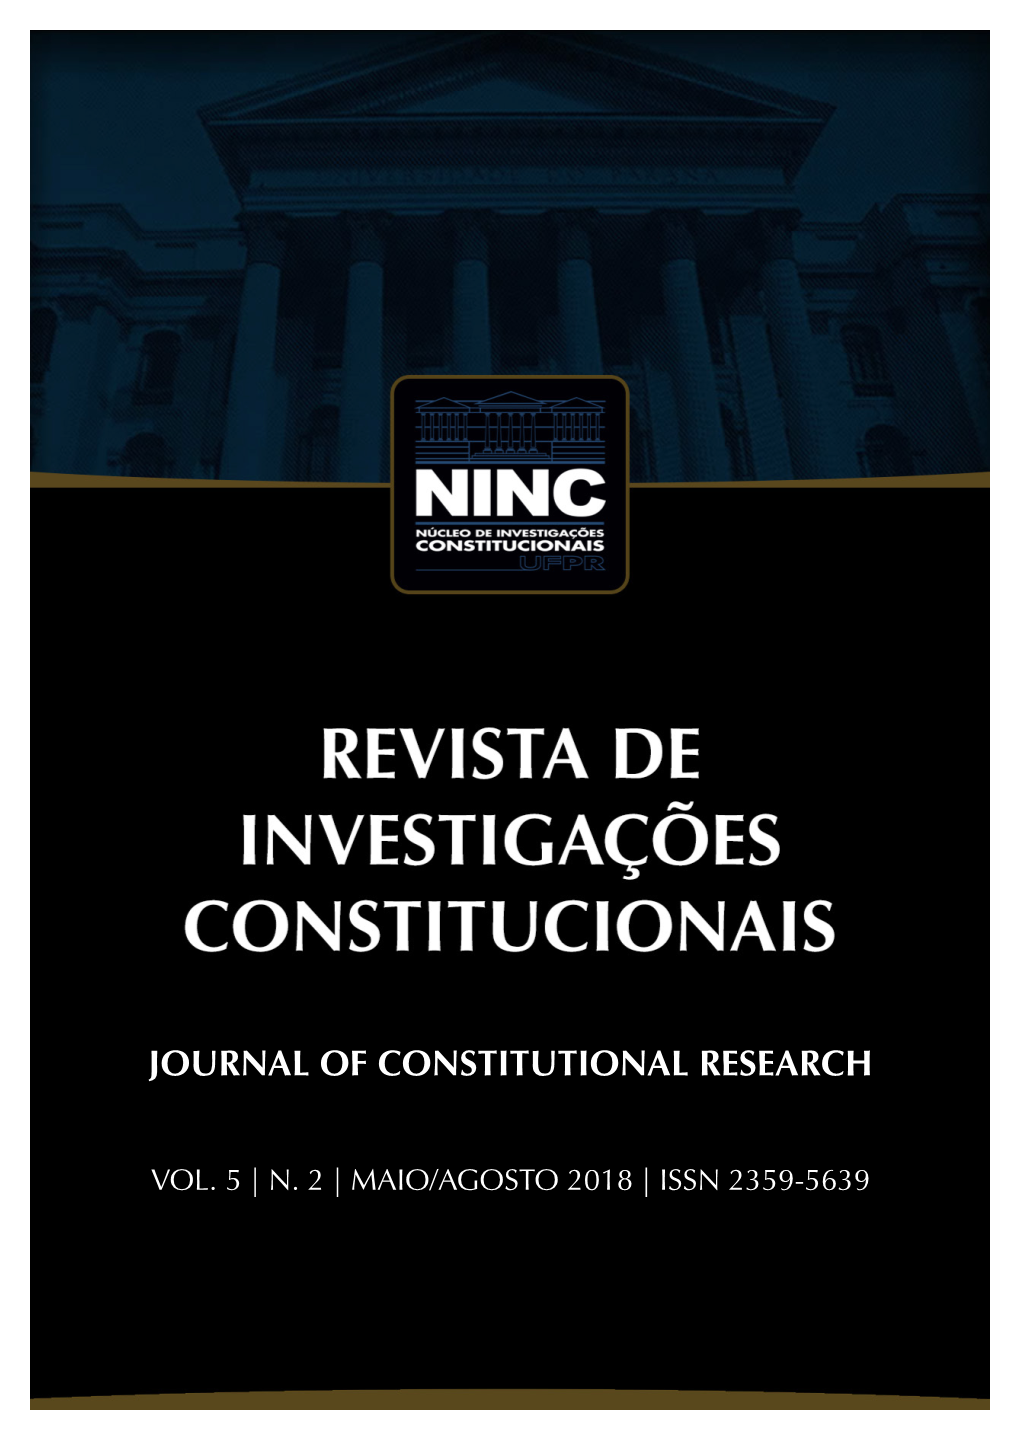 Journal of Constitutional Research